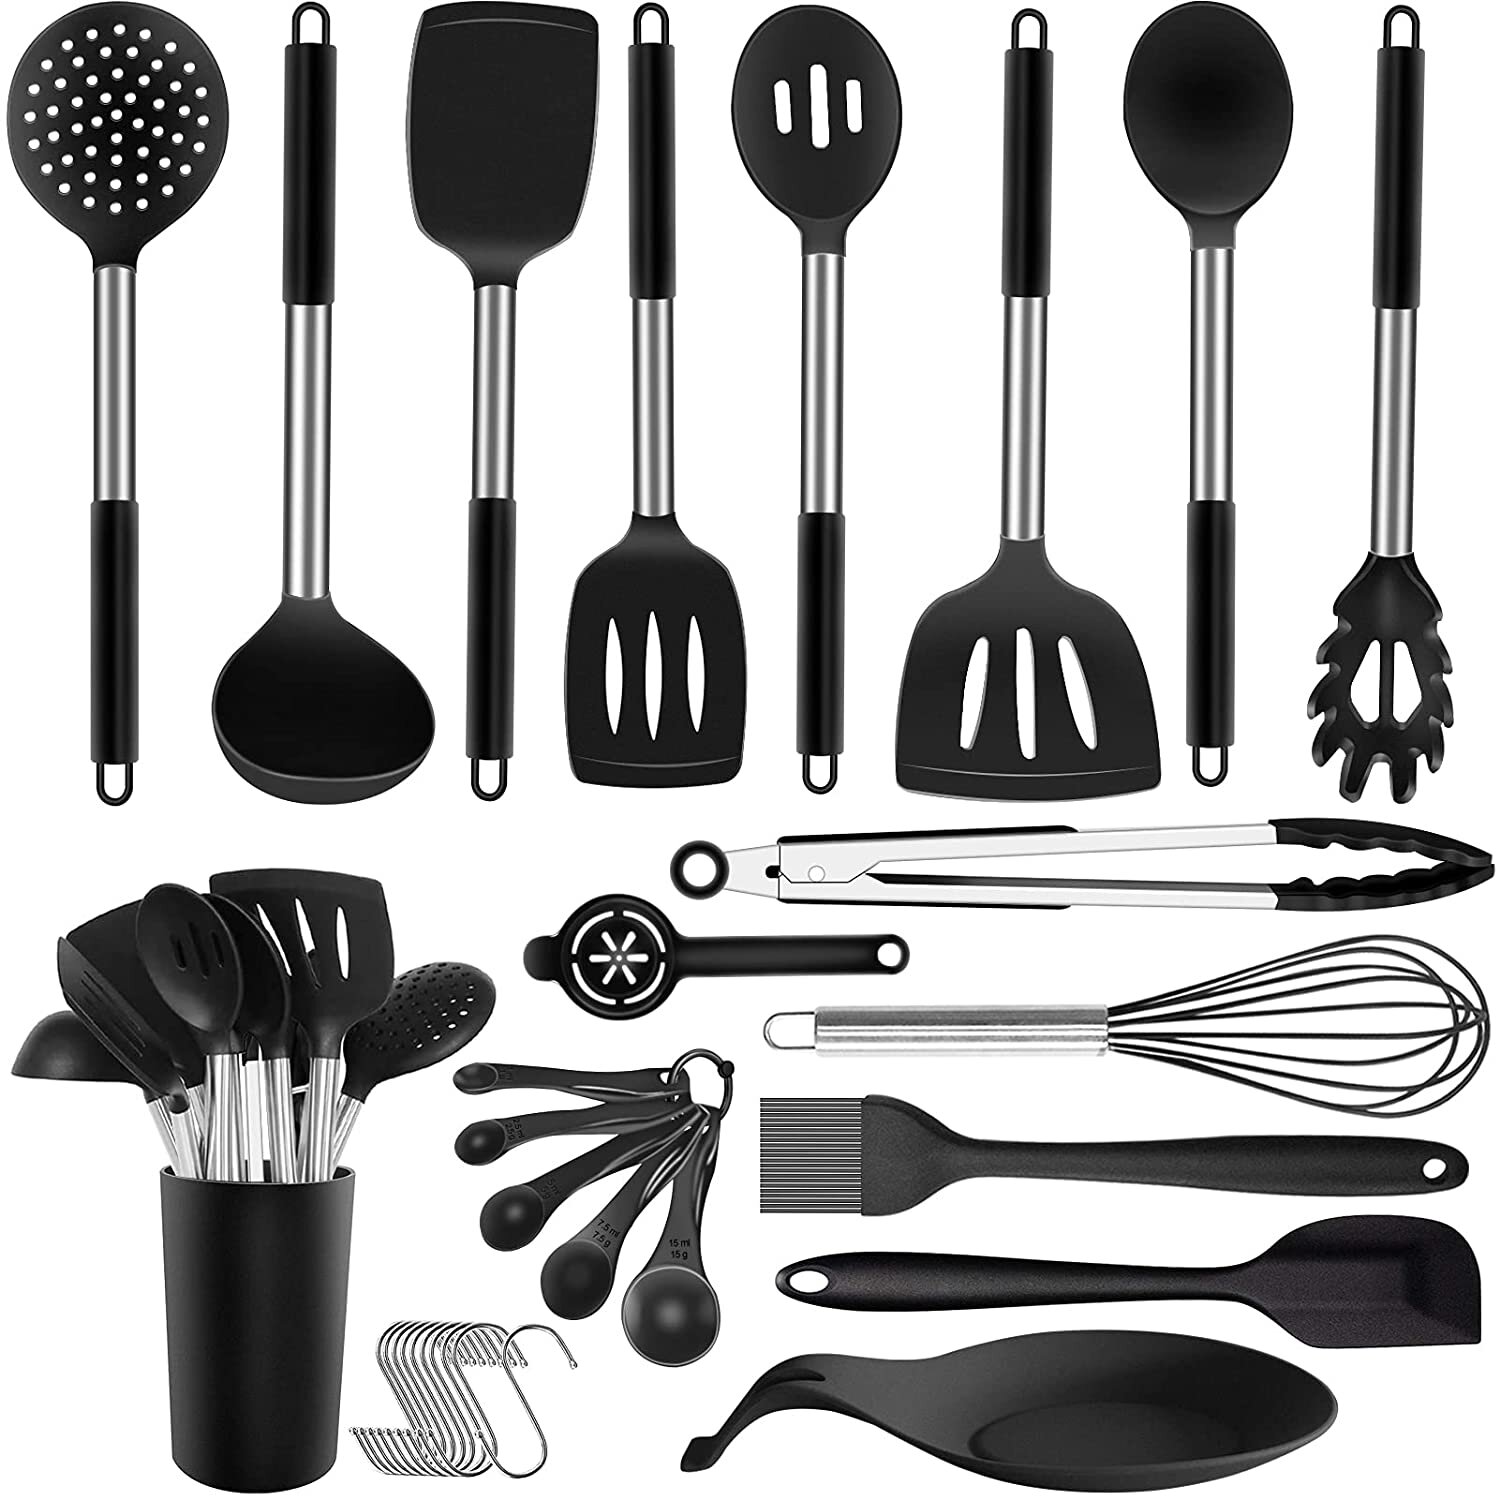 Kitchen Utensils Set Silicone Cooking Utensils   25Pcs Non Stick Heat  Resistant Silicone Spatula Spoons Whisk Tongs Stainless Steel Handle  Cookware ...